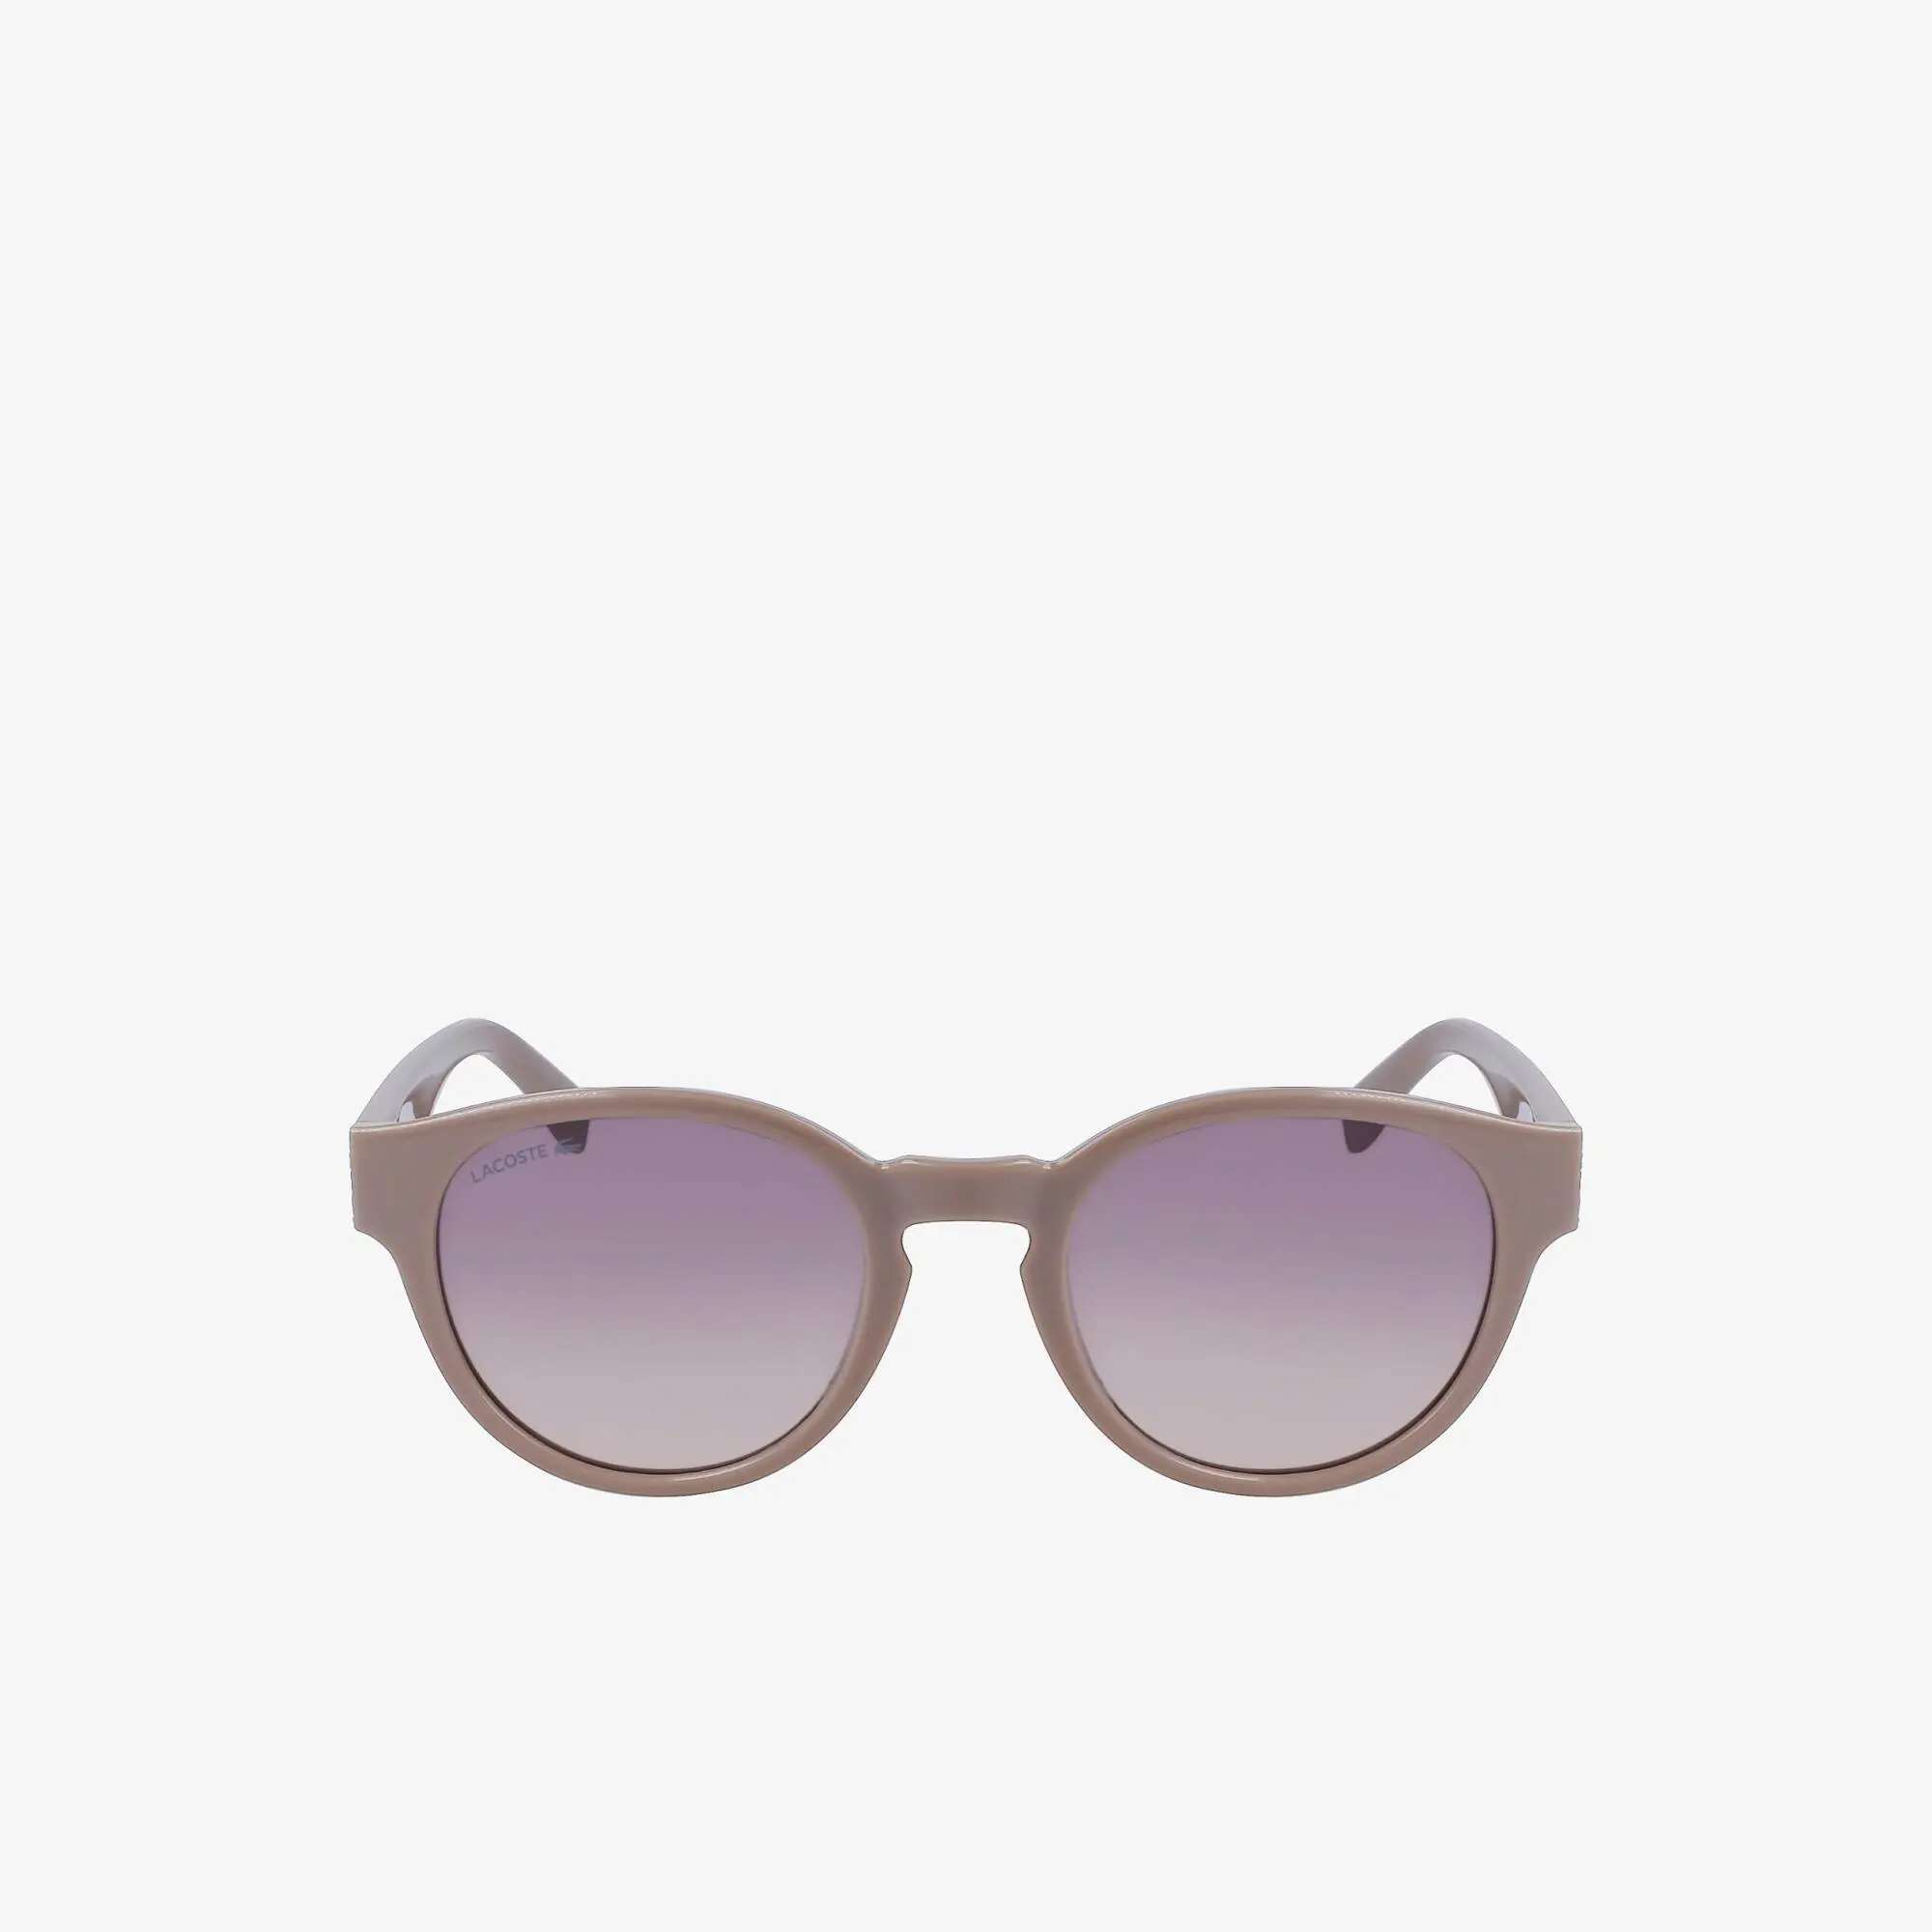 Lacoste Oval Plant Based Resin L.12.12 Sunglasses. 2